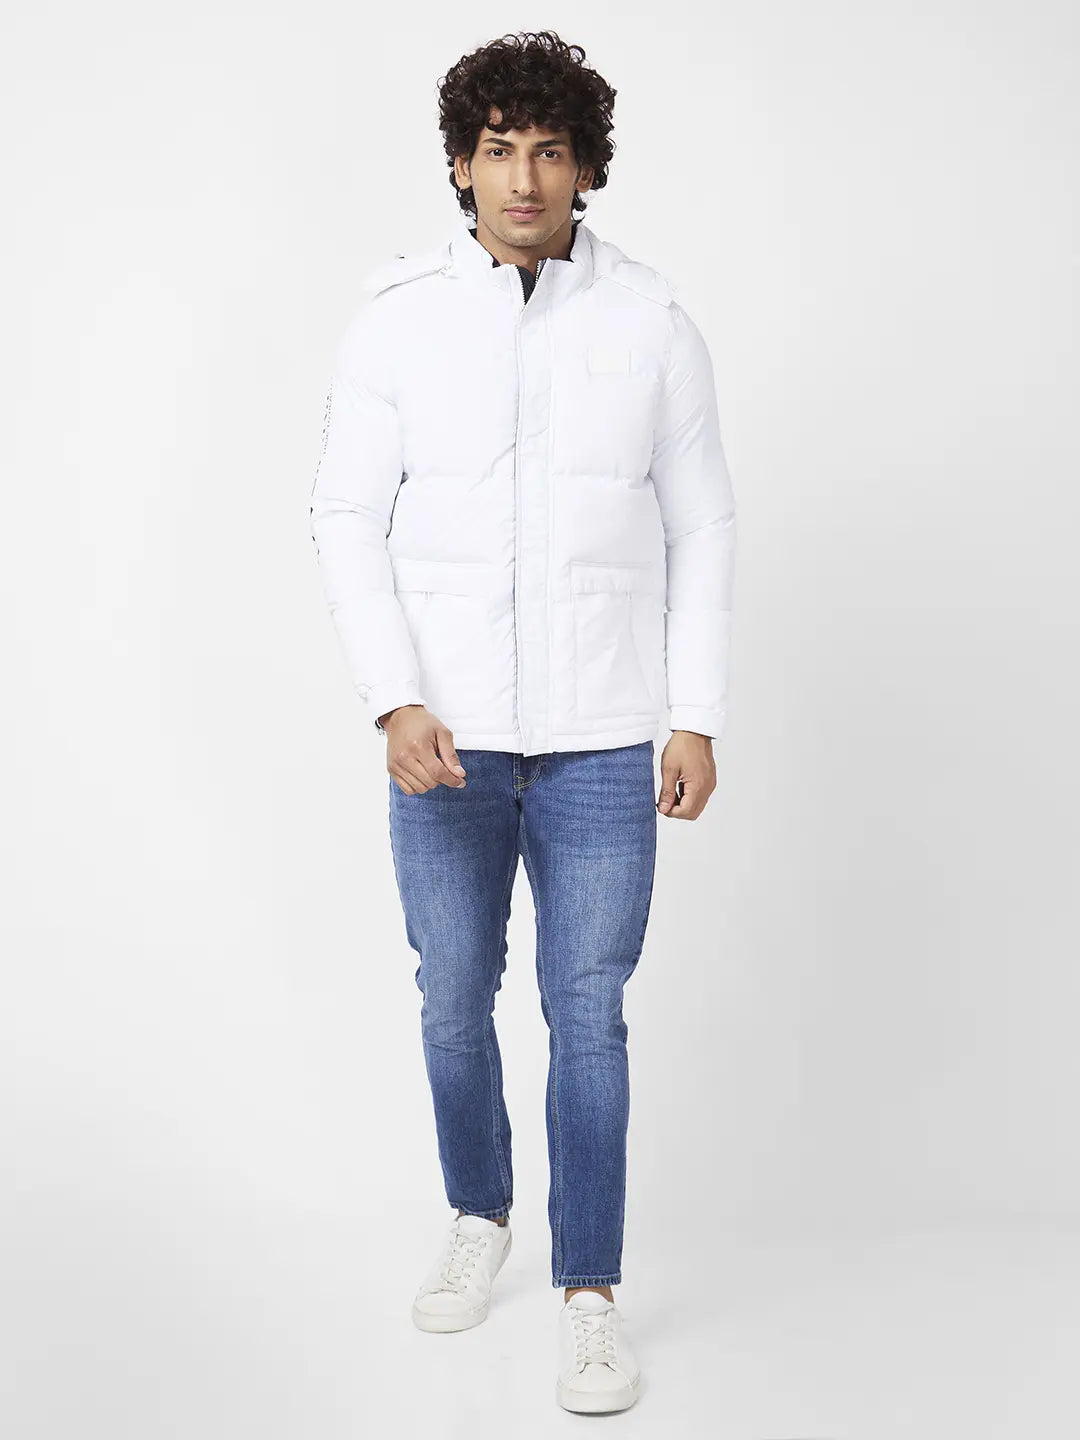 MEN'S PUFFER JACKET WITH ZIPPER PATCH POCKET & PRINTED DETAILS ON SLEEVES